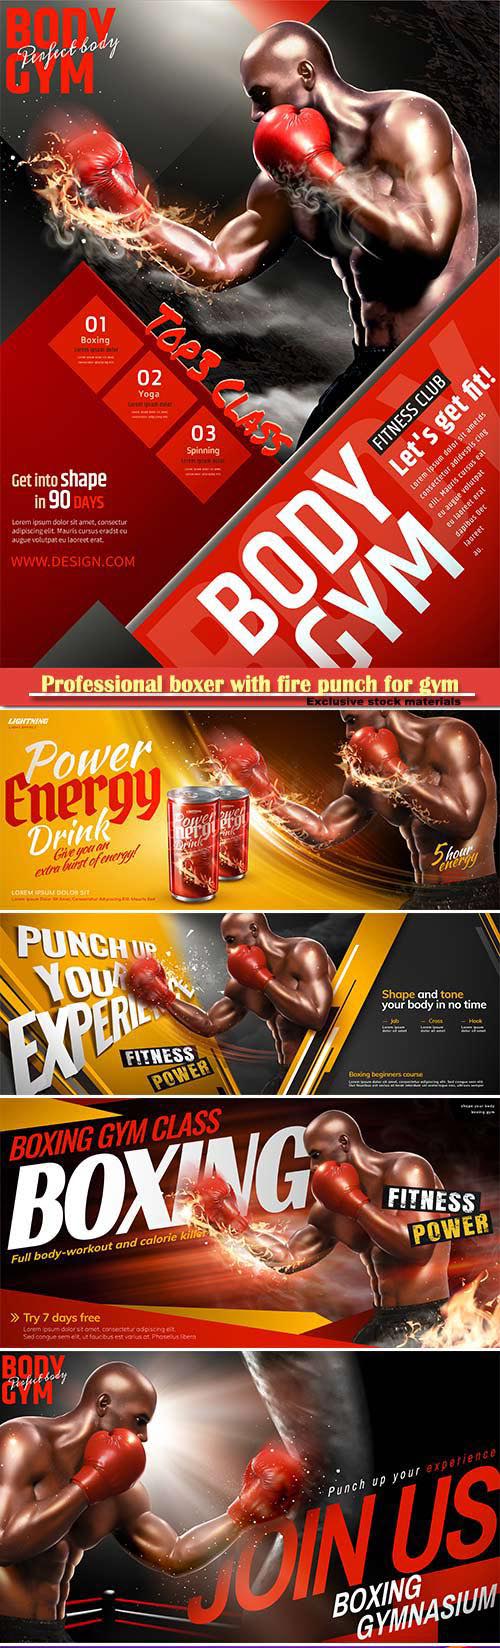 Professional boxer with fire punch for gym class poster in 3d illustration